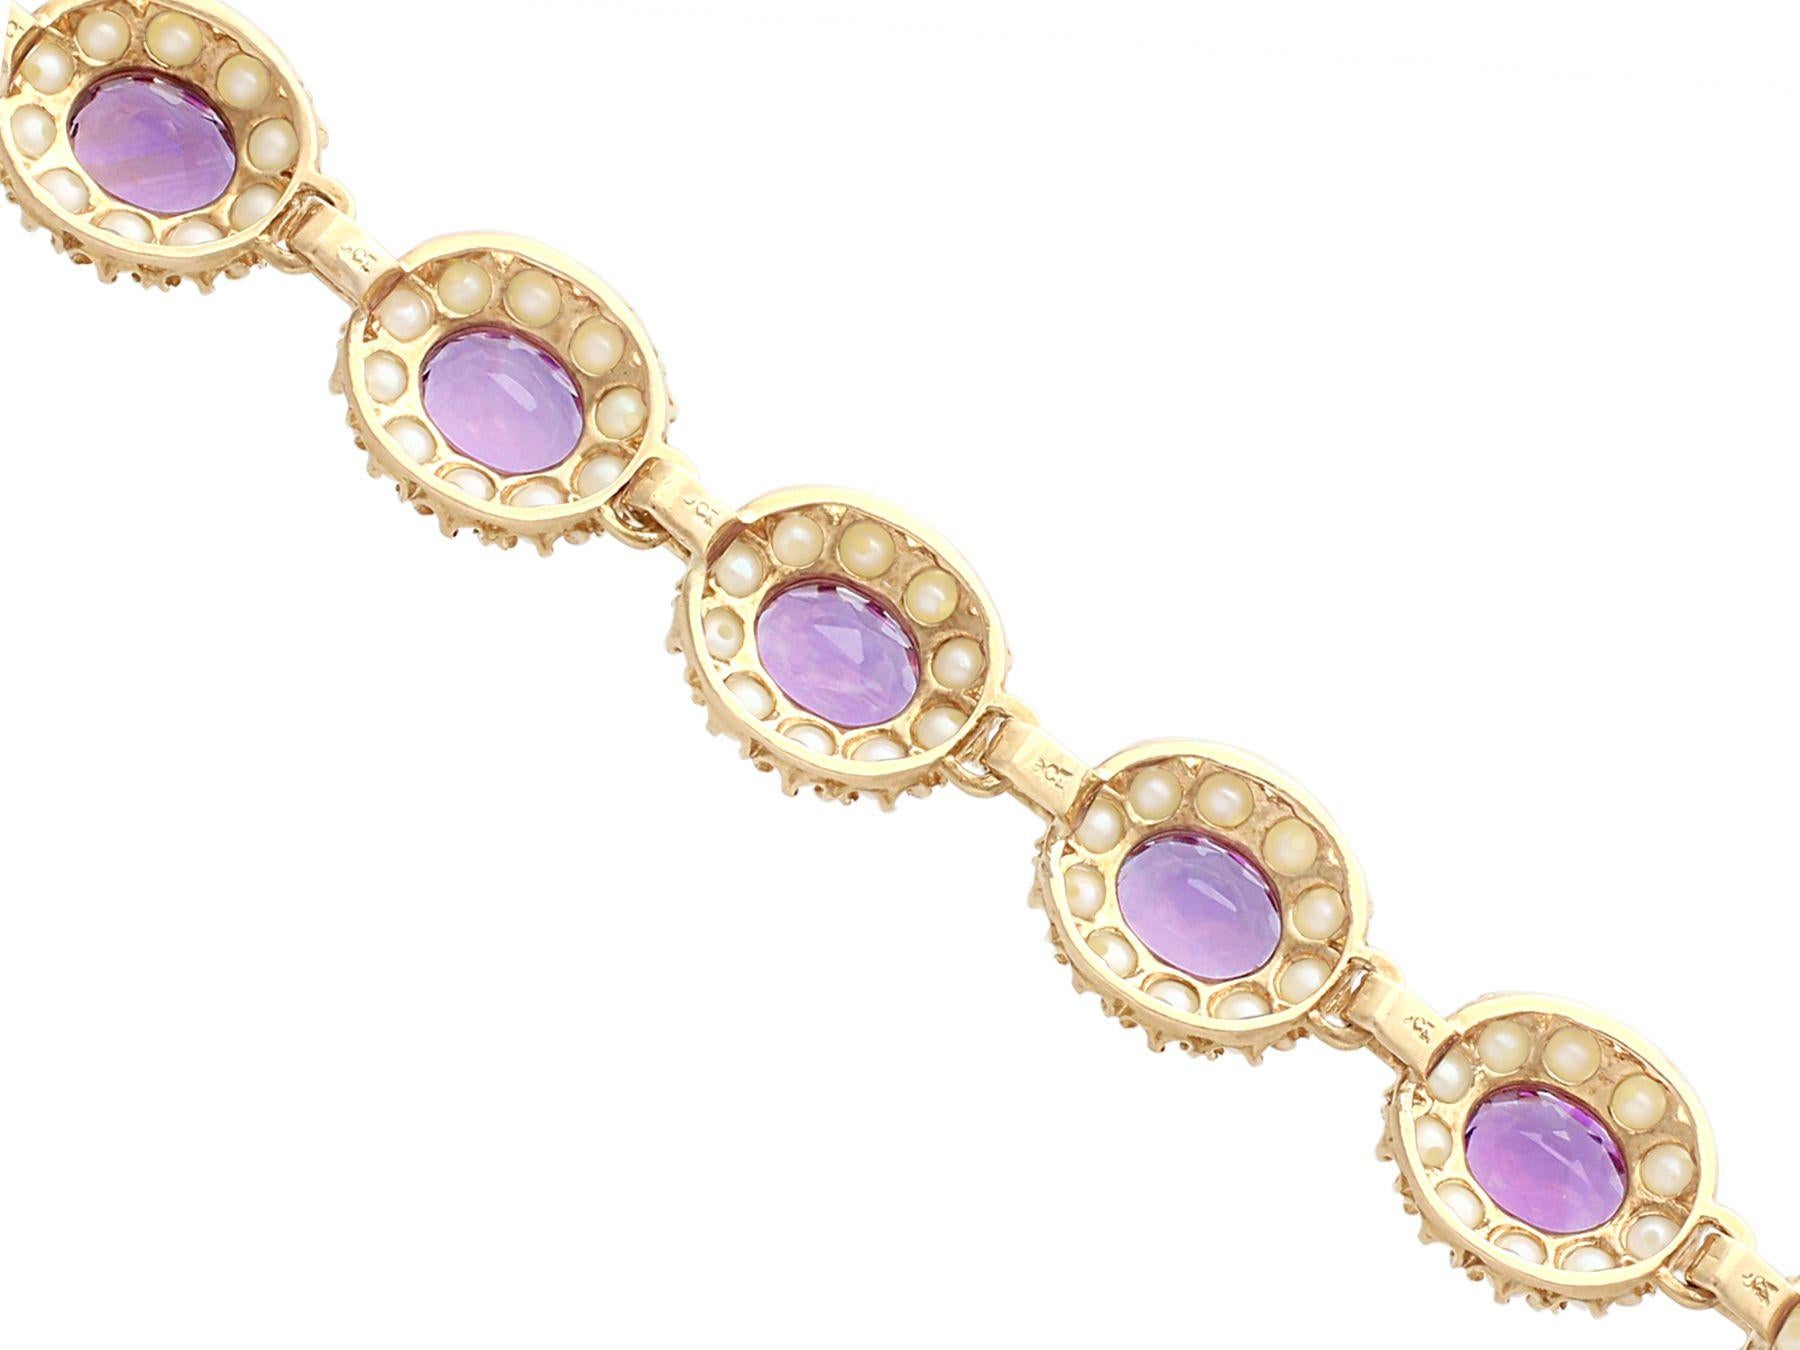 Women's or Men's 1960s, Vintage 19.80 carat Amethyst and Cultured Pearl Yellow Gold Bracelet